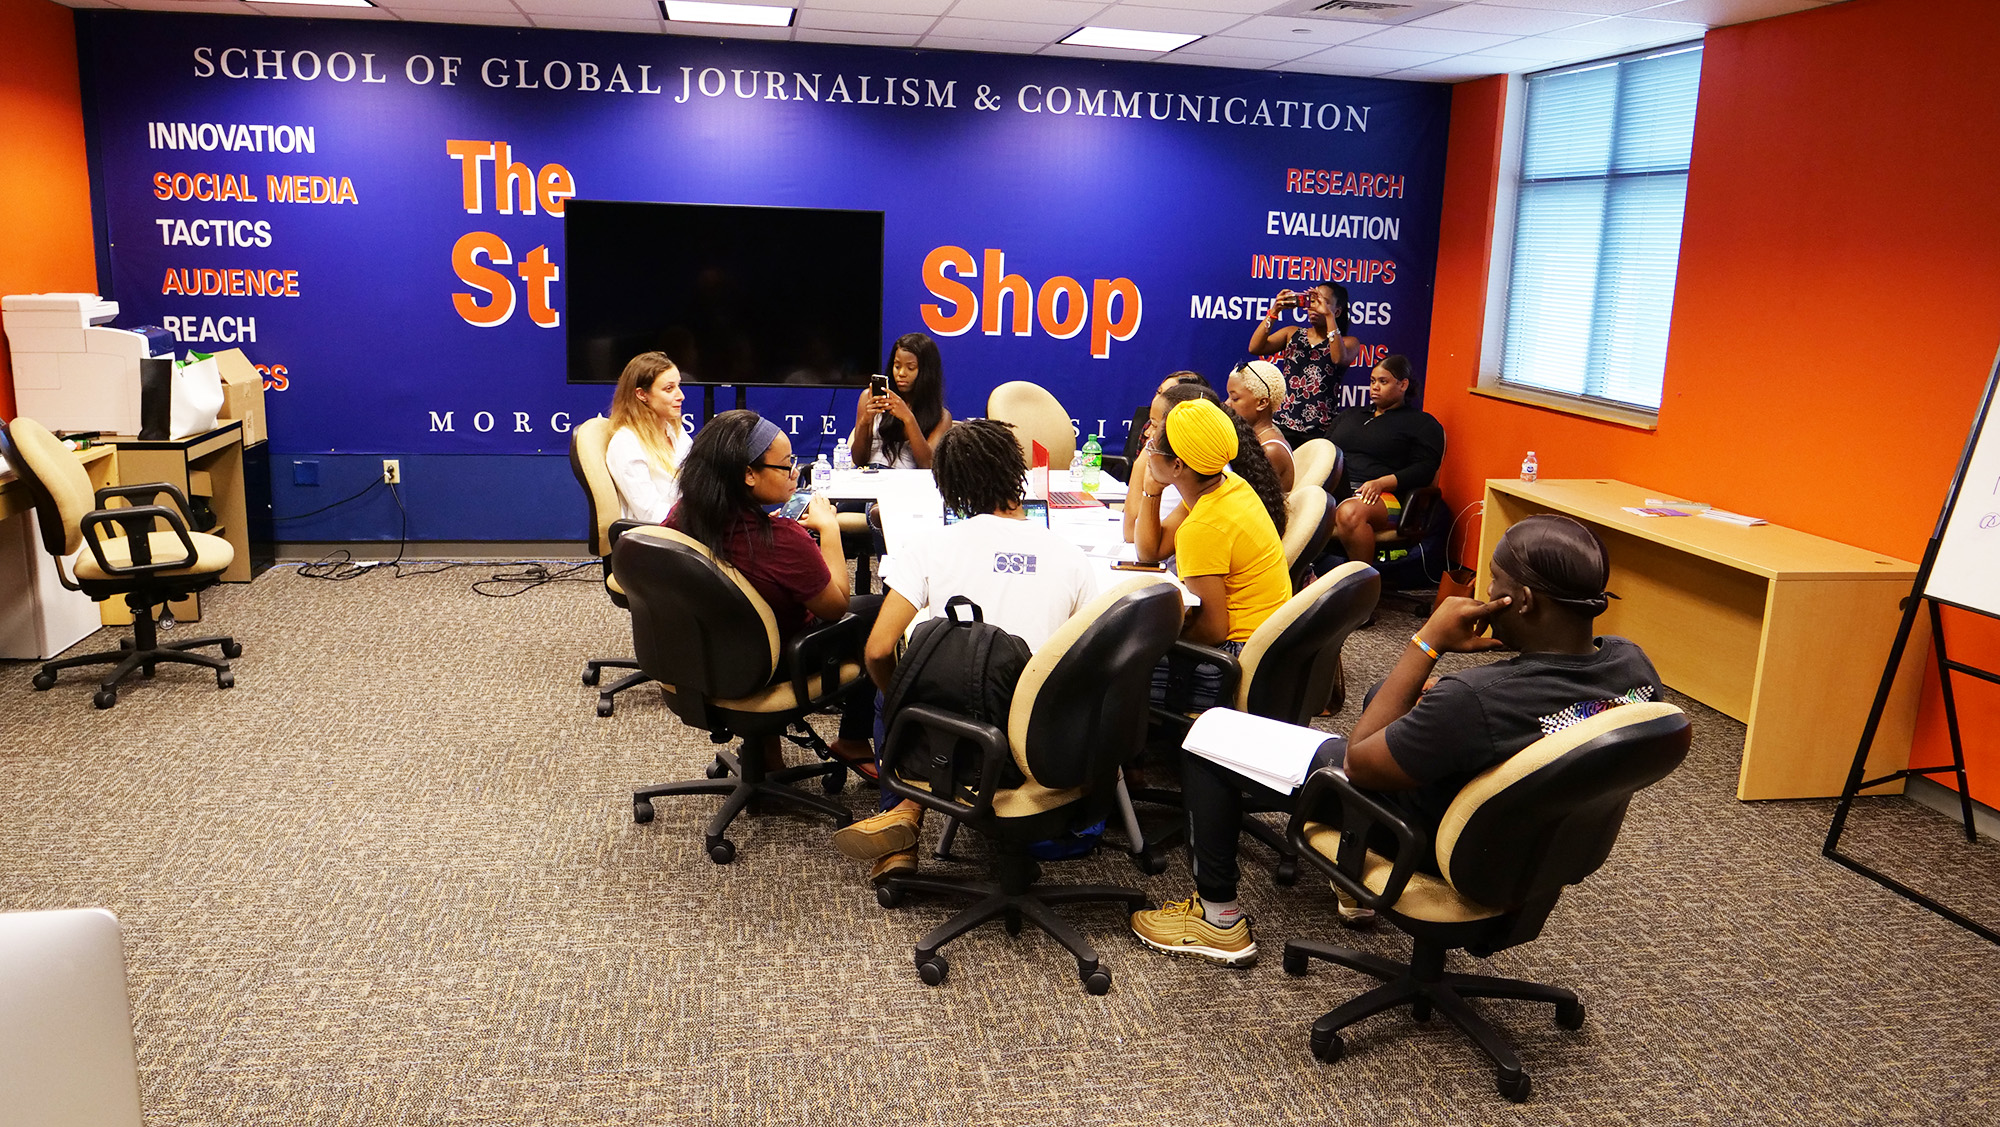 School of Global Journalism and Communication